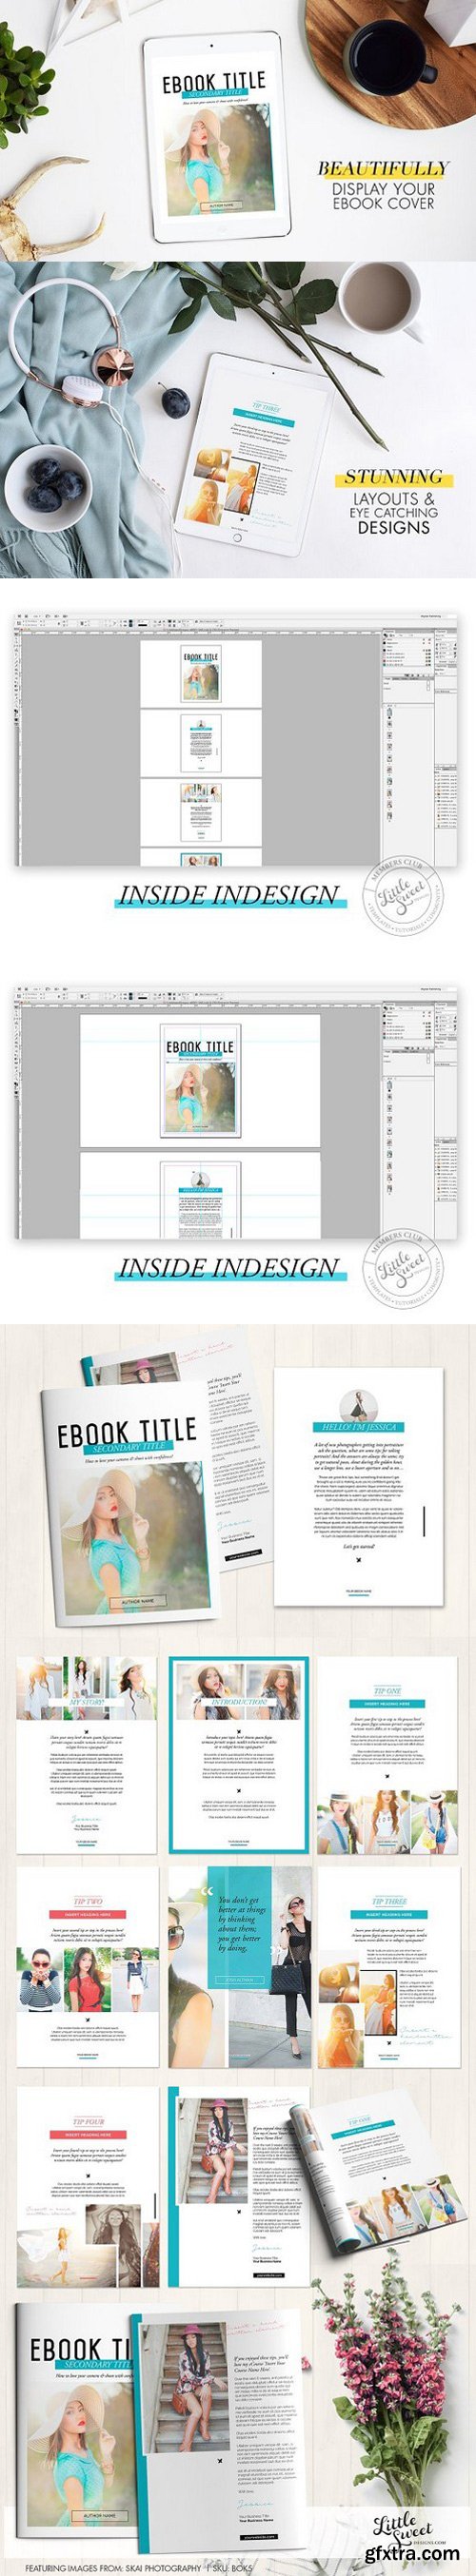 CM - 10 page InDesign INDD eBook Template 999955